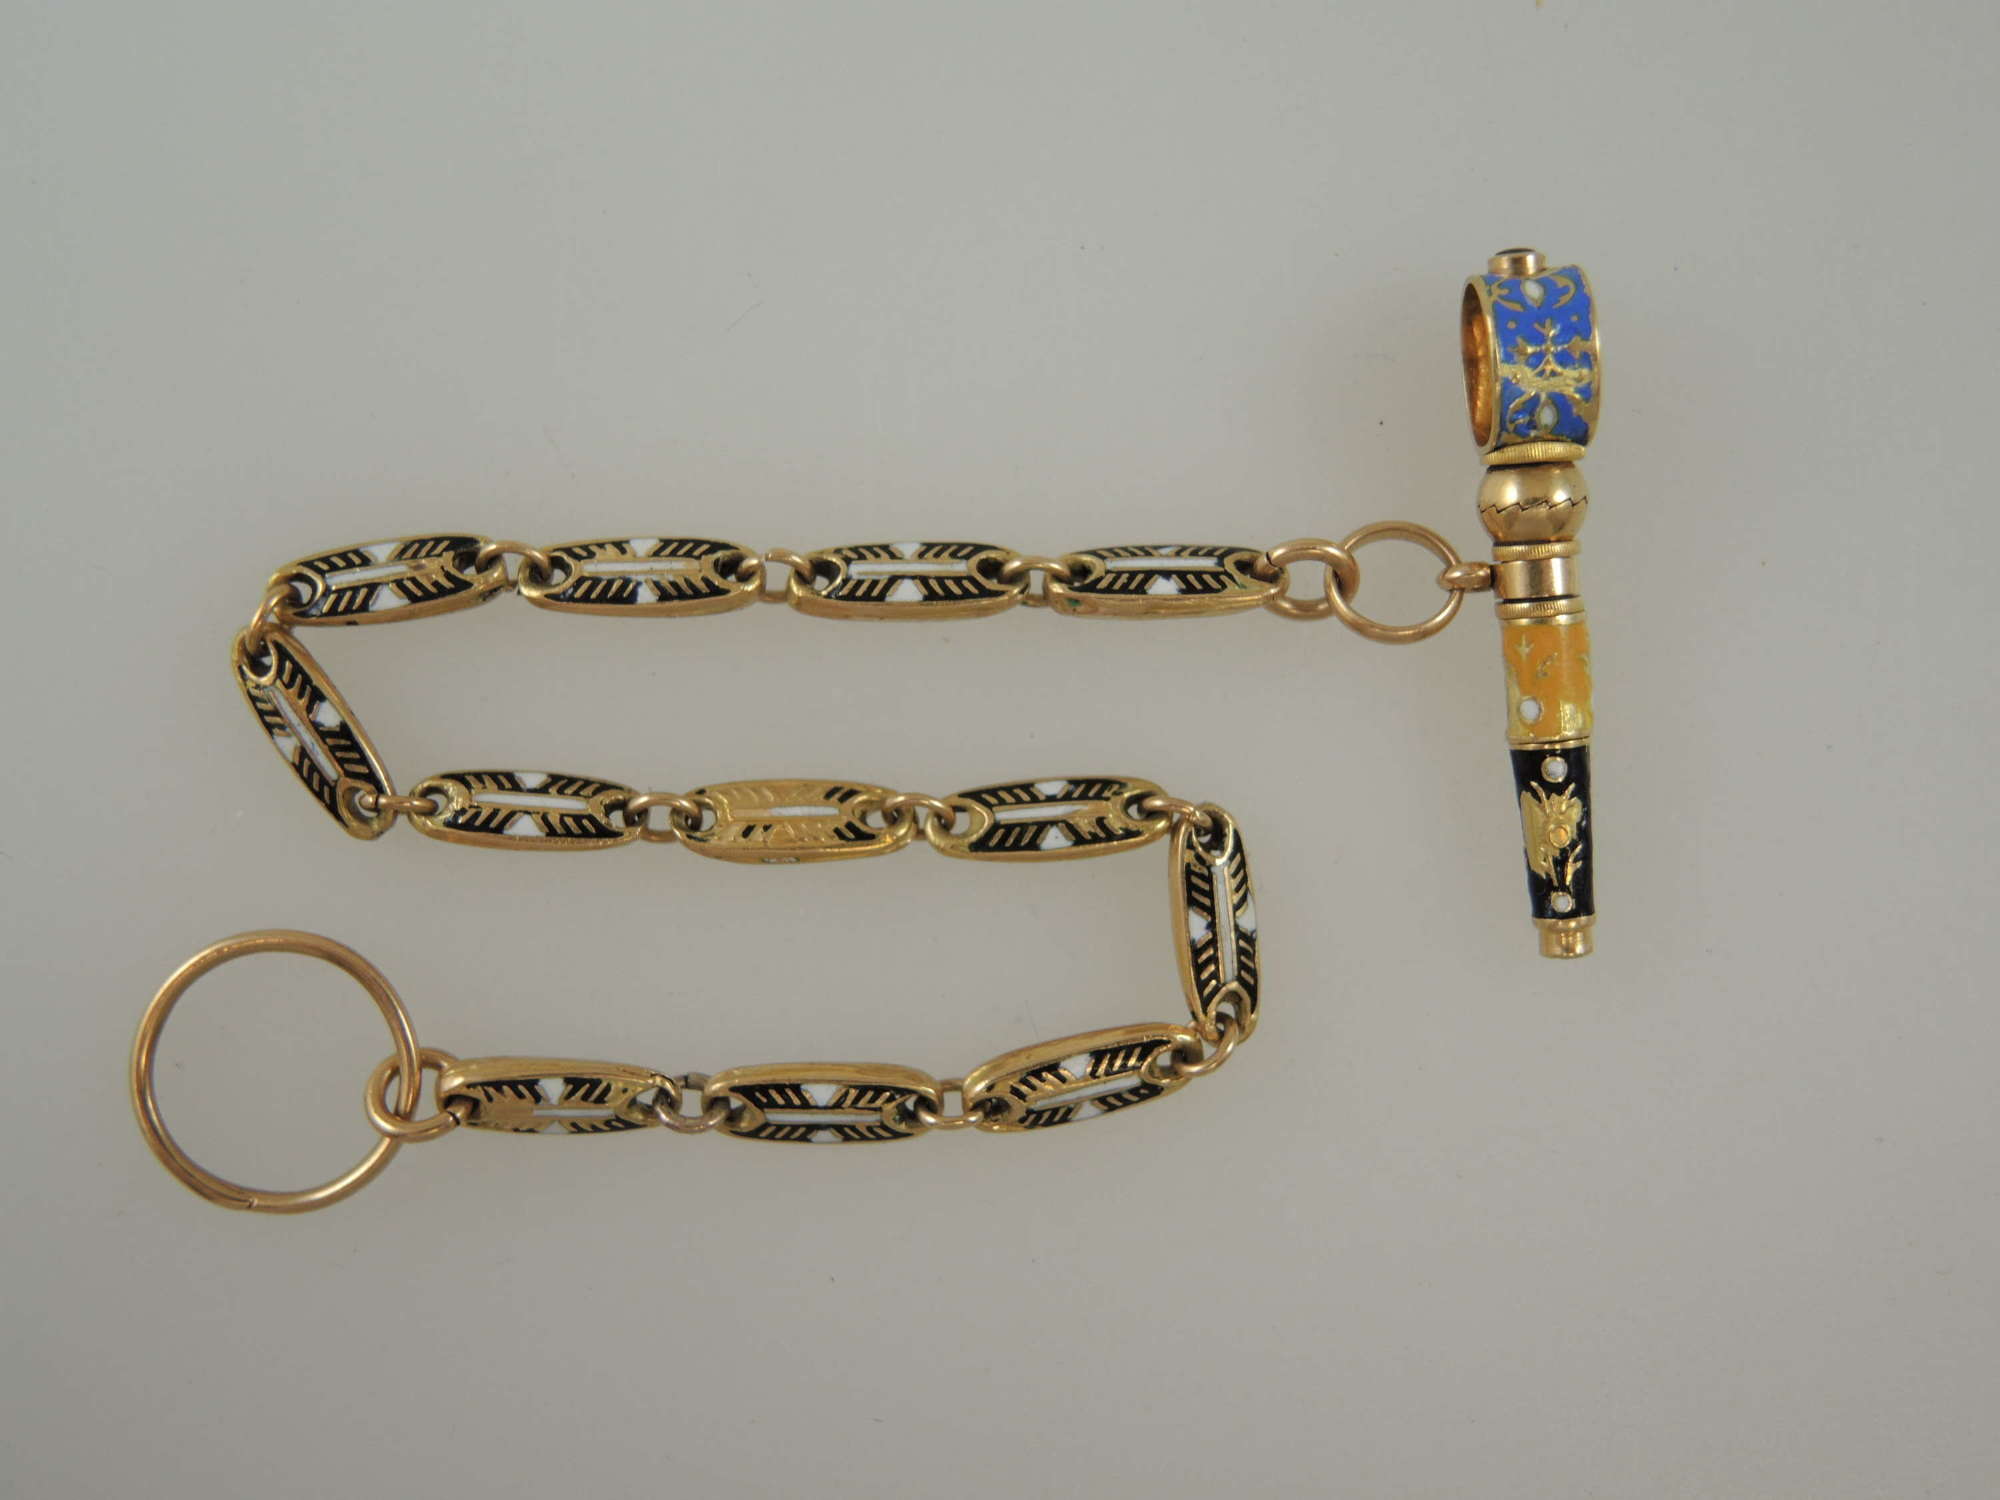 18K gold and enamel Breguet pocket watch key and chain c1810